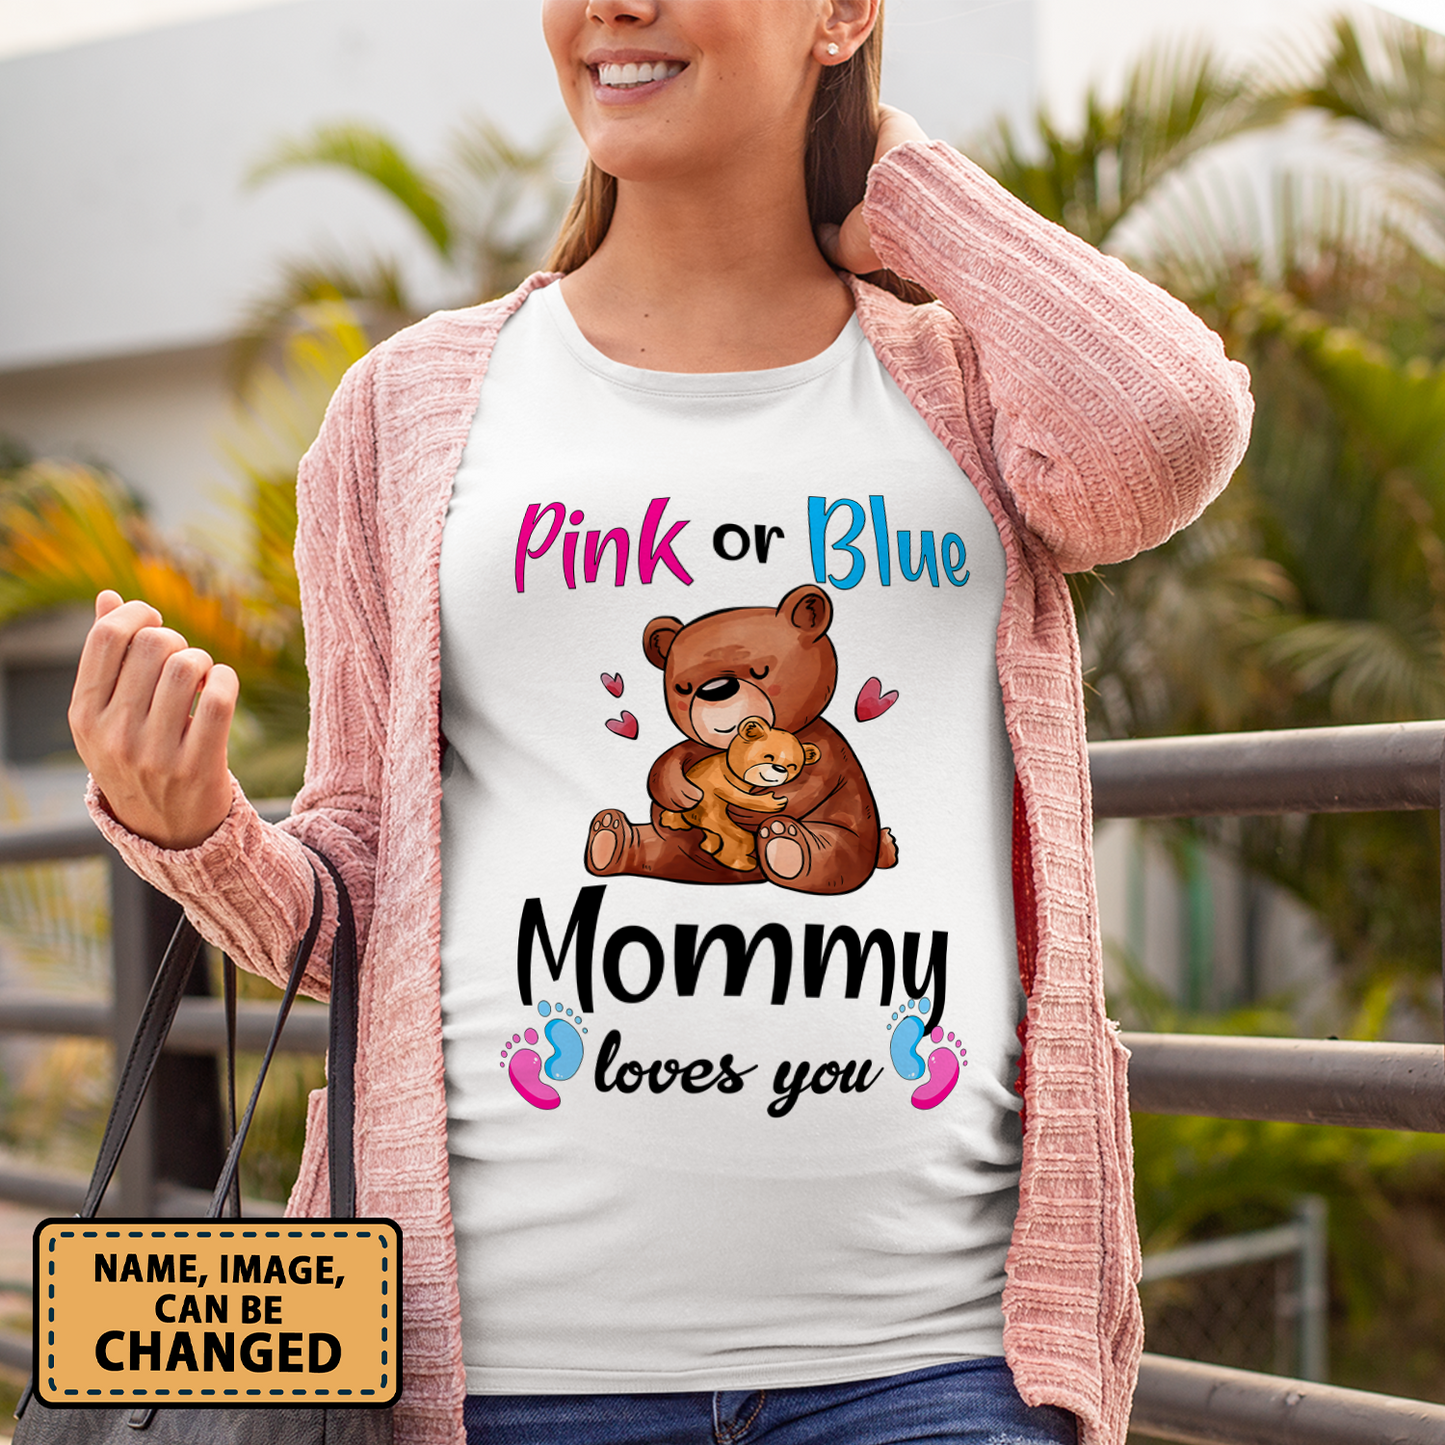 Short Sleeve Maternity Tops Shirts Custom Mama Baby Bear Pink Or Blue Mommy Loves You Pregnancy Clothes